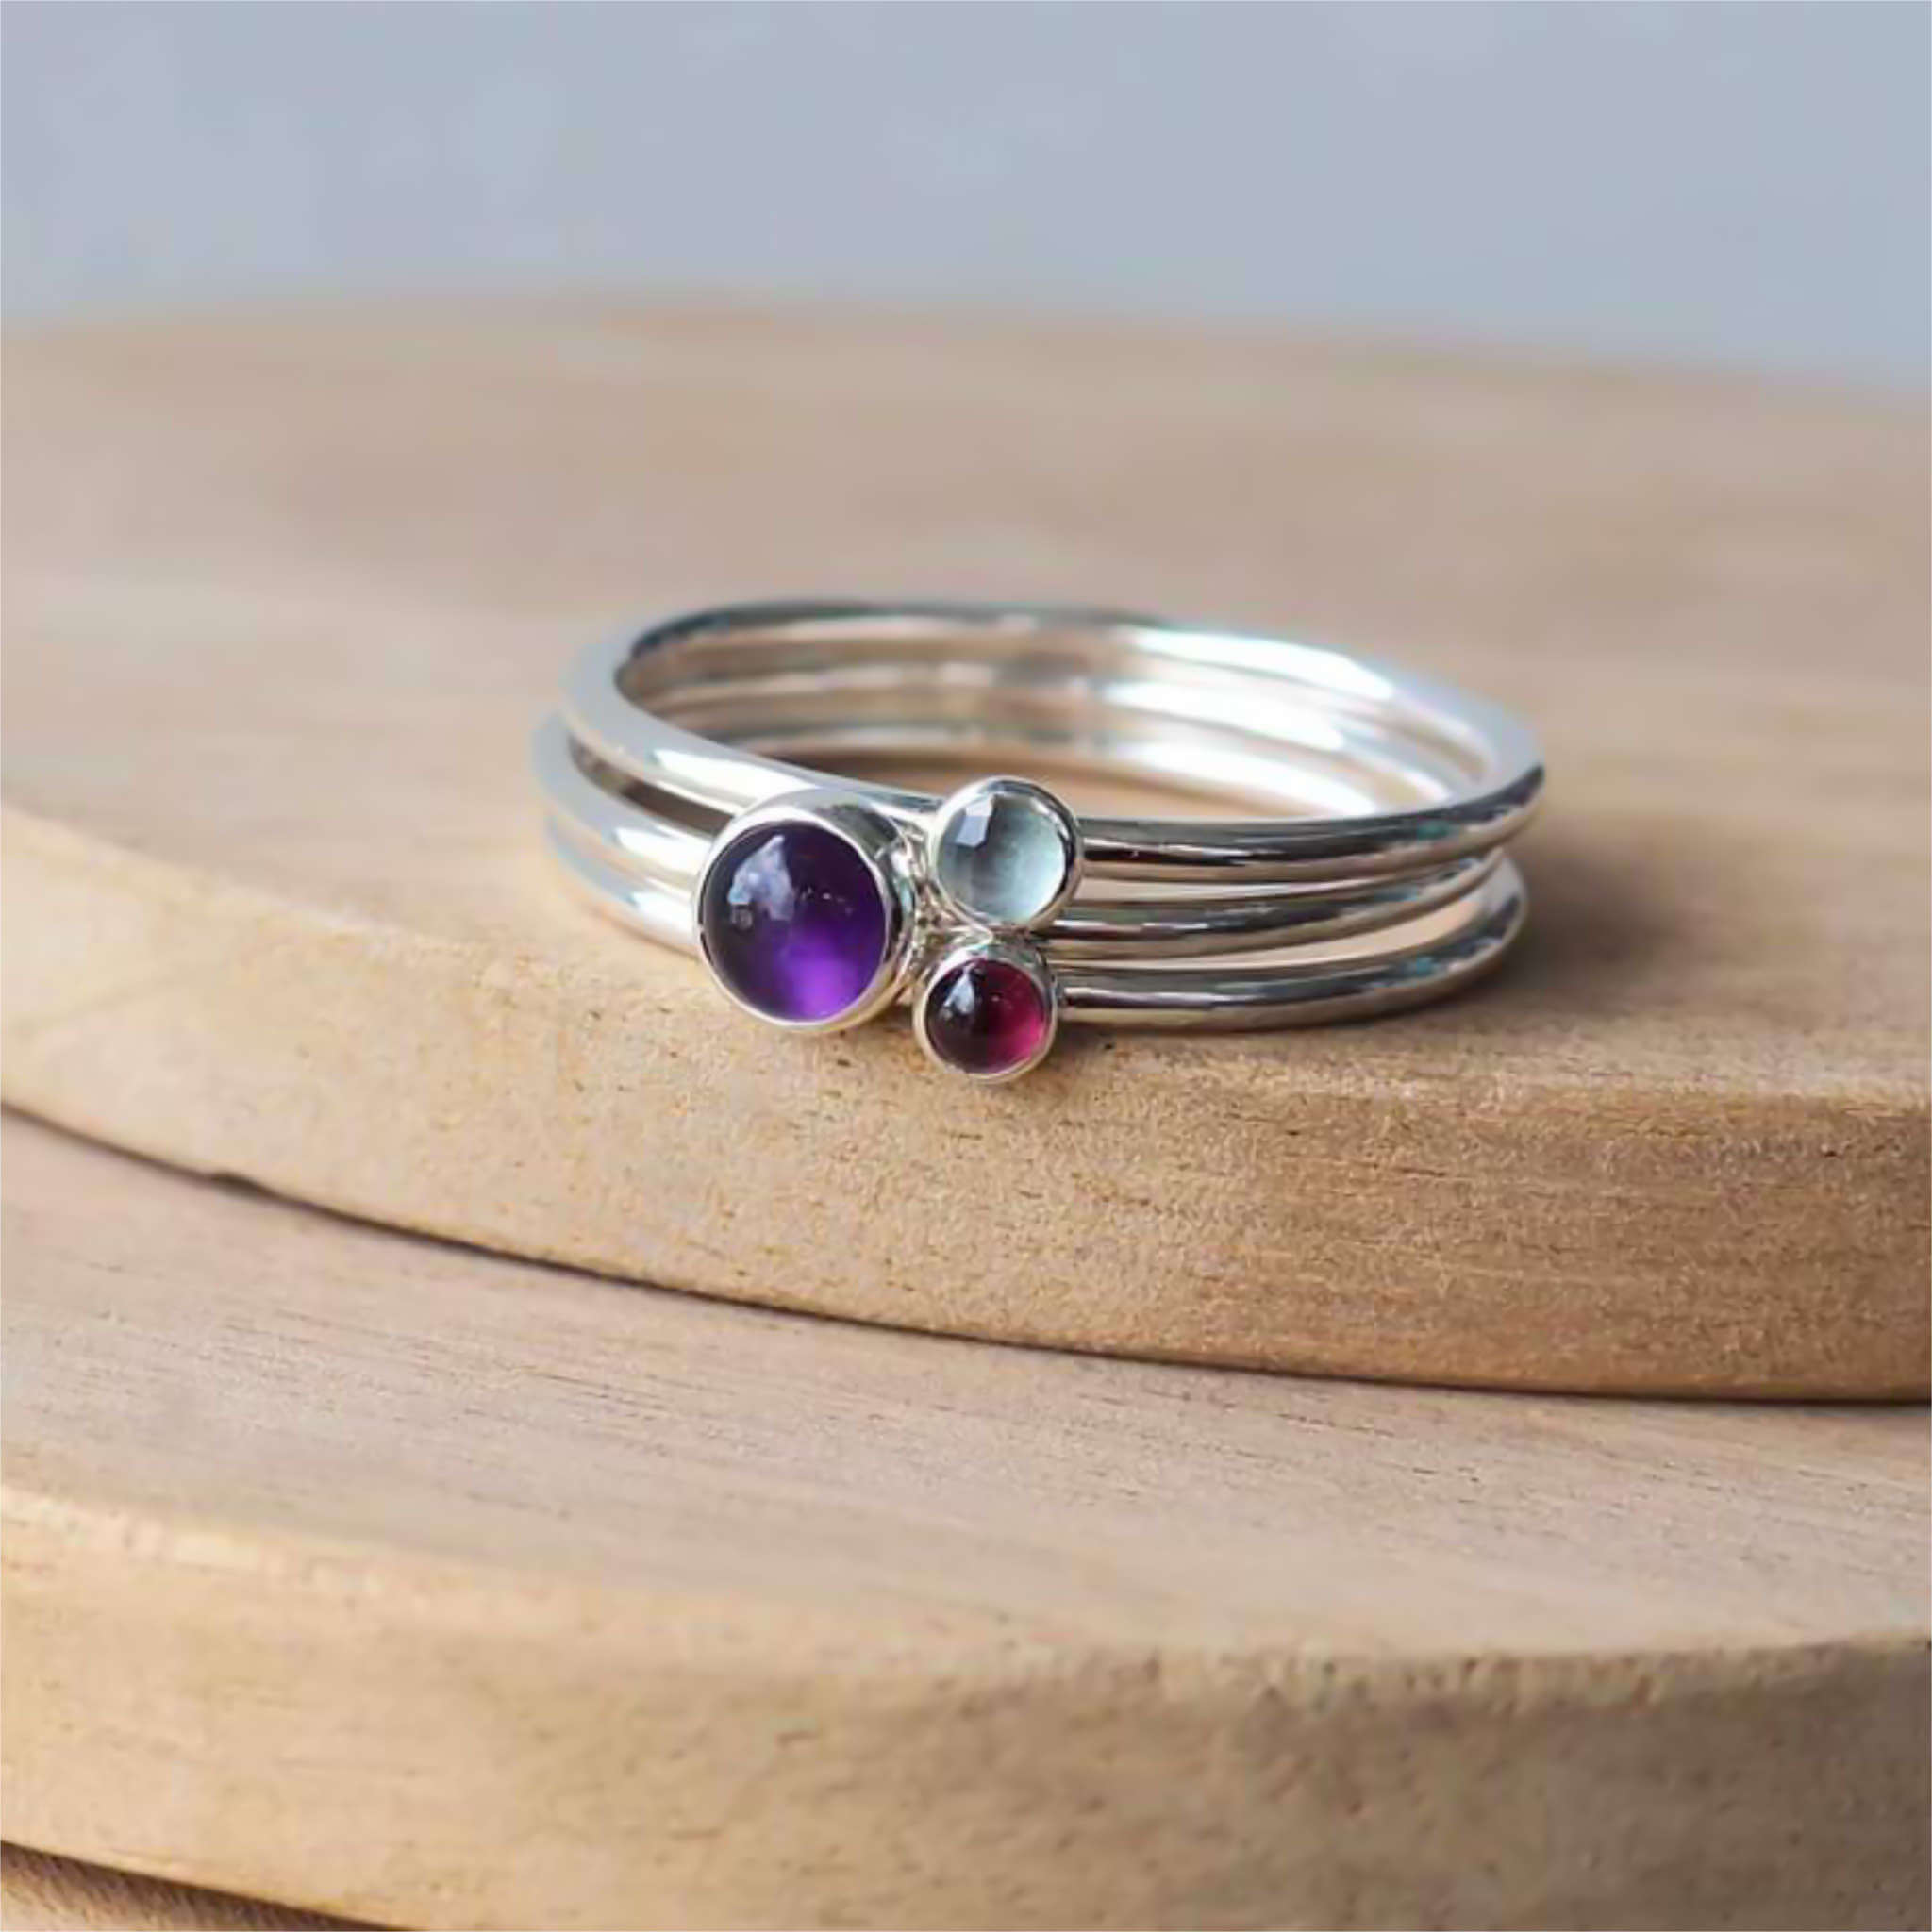 Three ring set made from Sterling Silver and assorted Birthstones. Set has a 5mm Amethyst ring, and two 3mm rings in Garnet and Blue topaz. Handmade in Scotland by Maram Jewellery